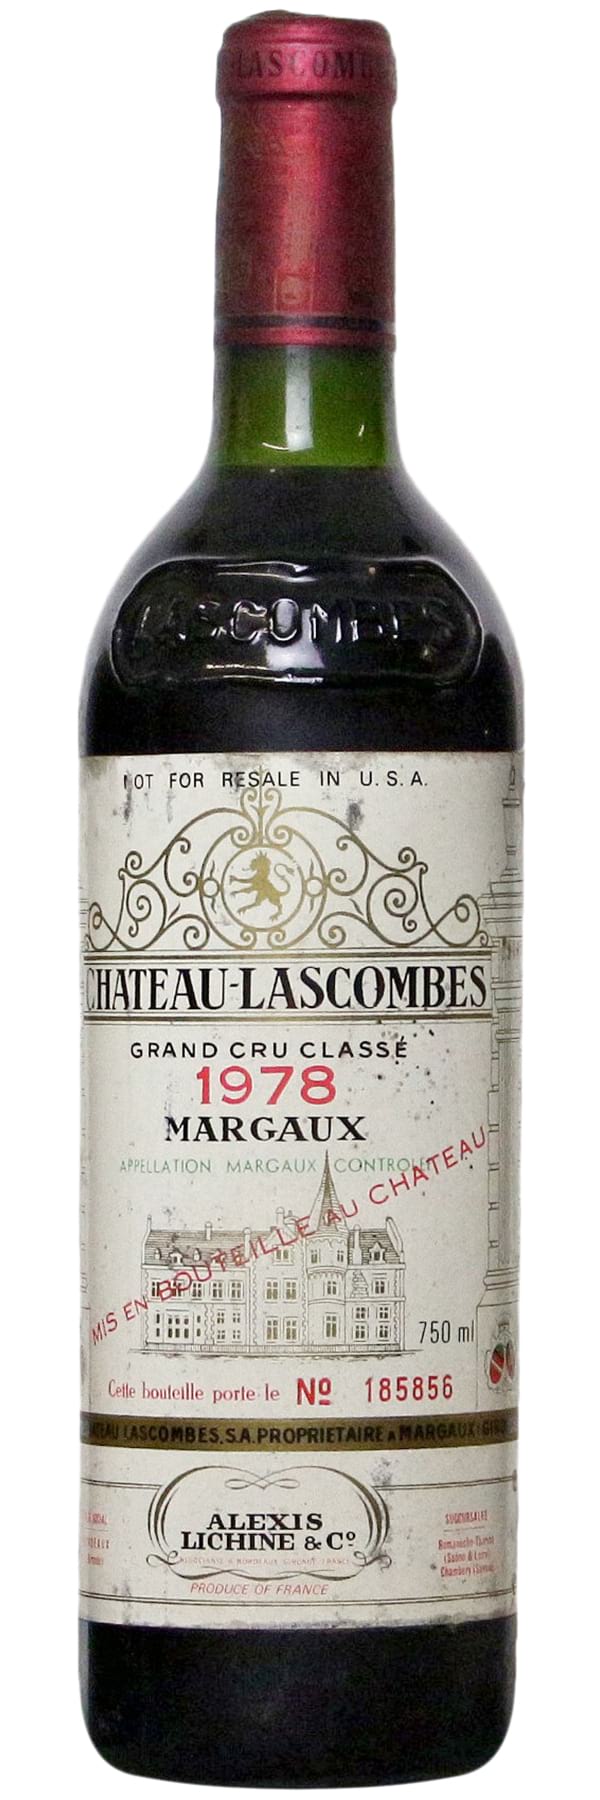 1978 Chateau Lascombes Margaux фото